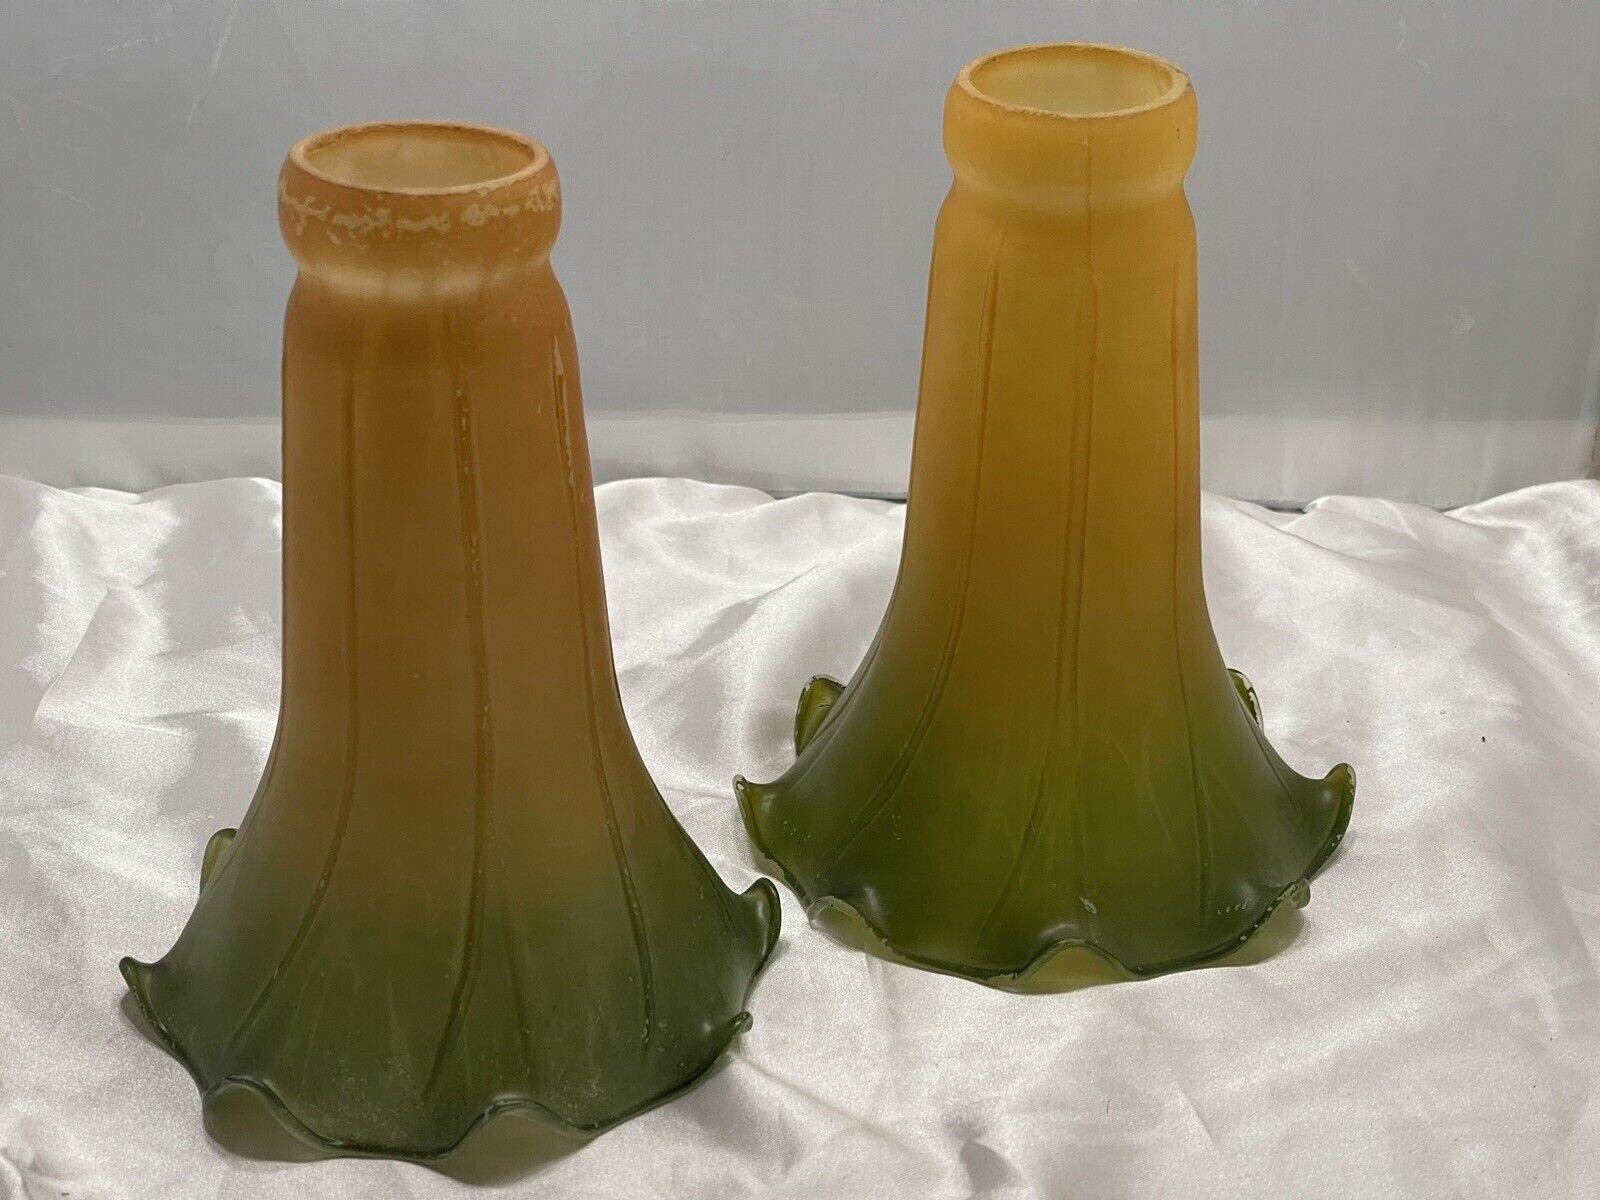 Vintage Tiffany Style Lily Pad Lamp Glass Shades, Amber and Green, Lot Of 2- 6”